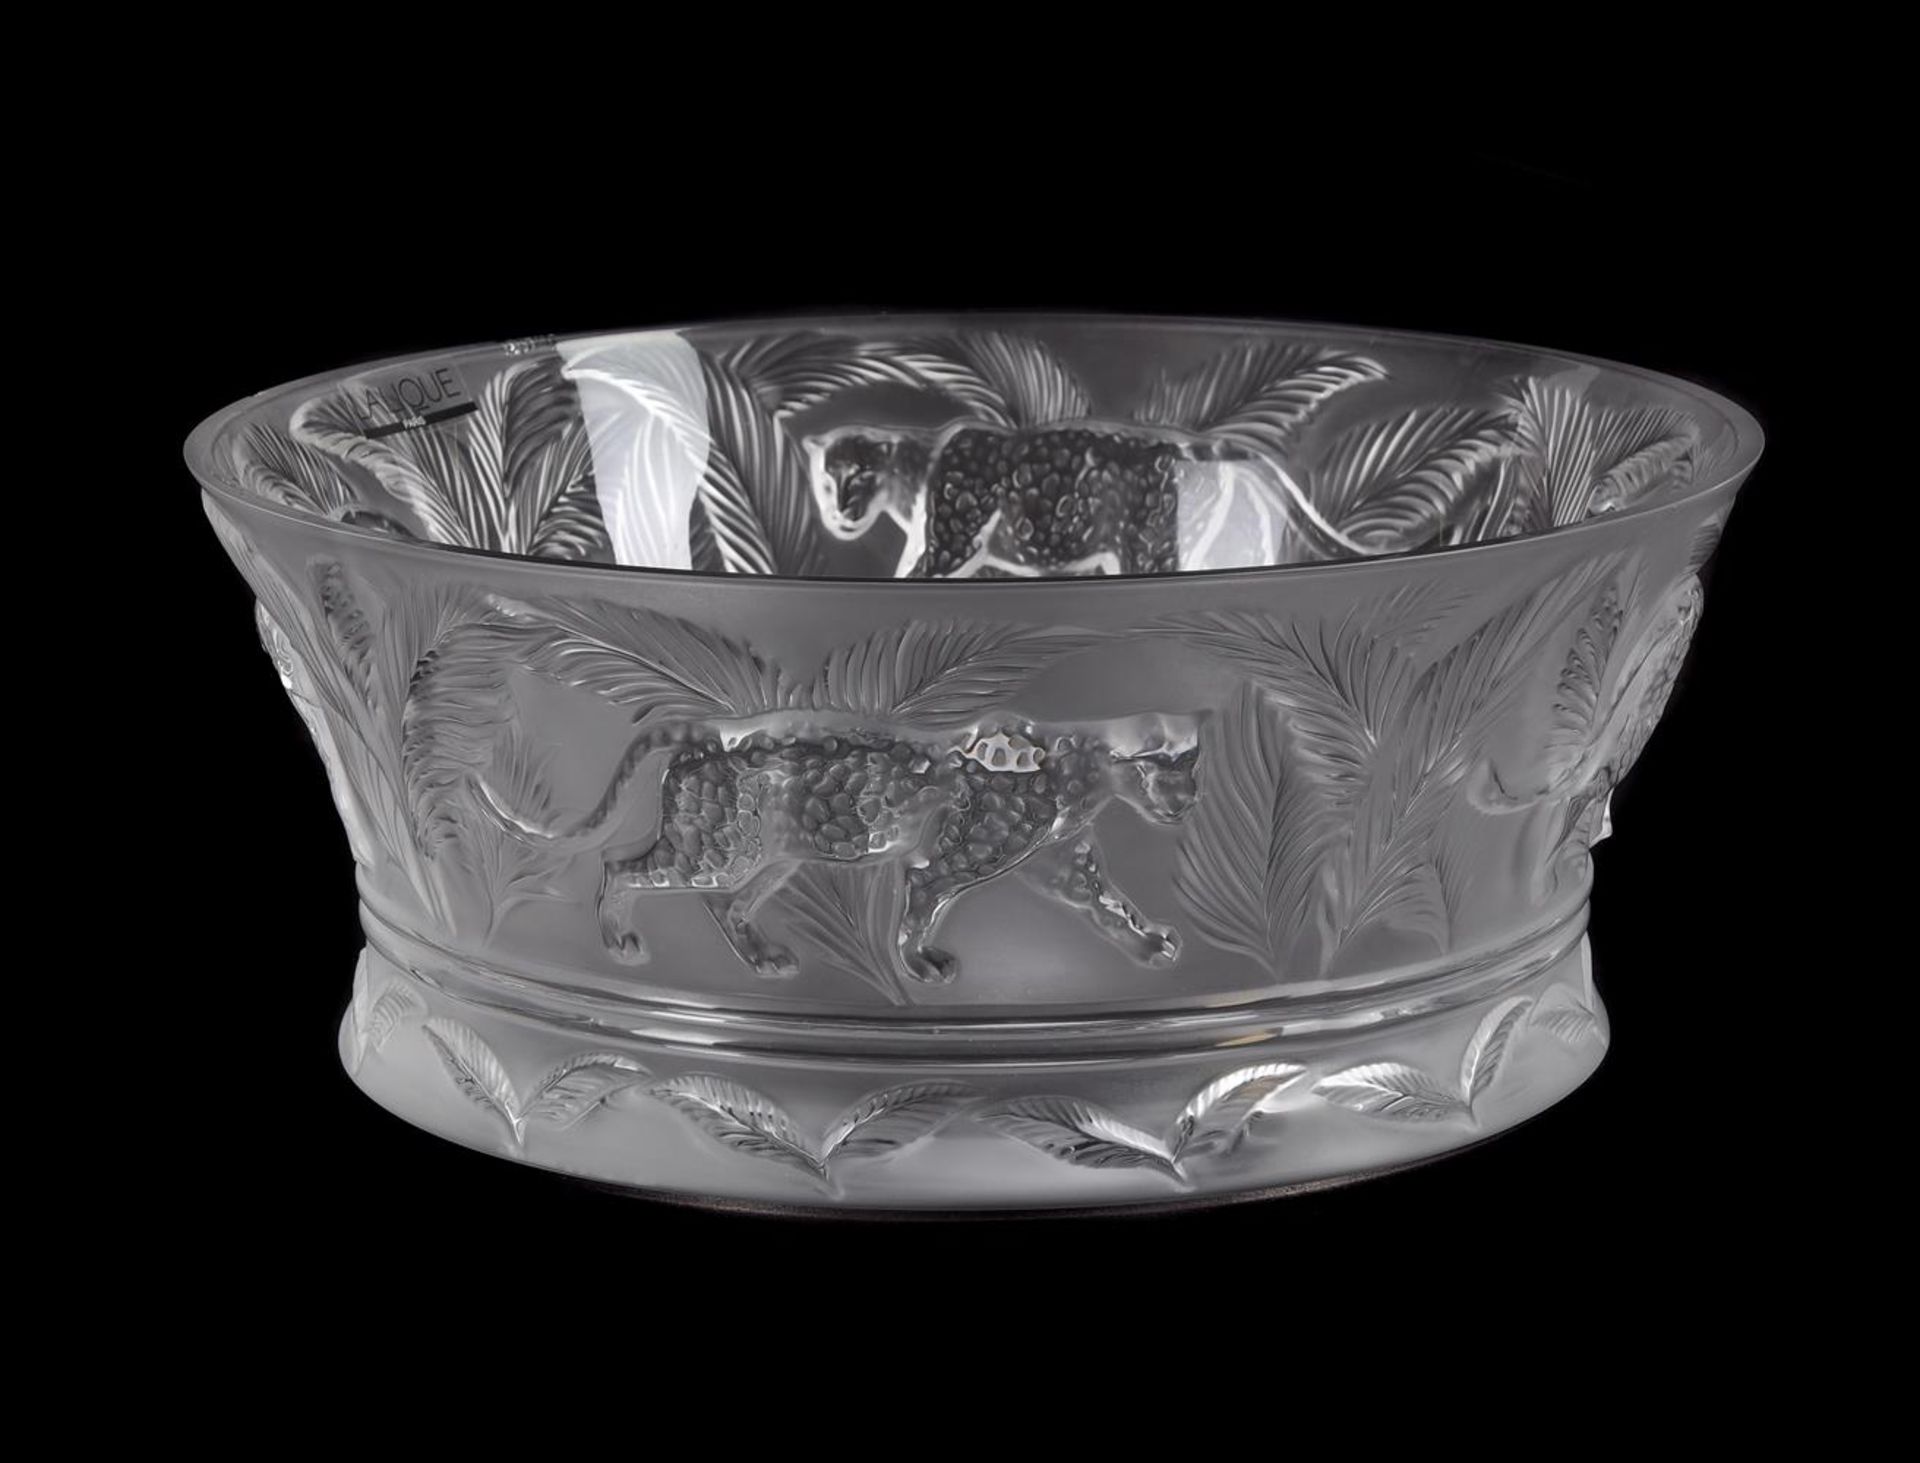 LALIQUE, CRYSTAL LALIQUE, A FROSTED GLASS JUNGLE BOWL - Image 2 of 2